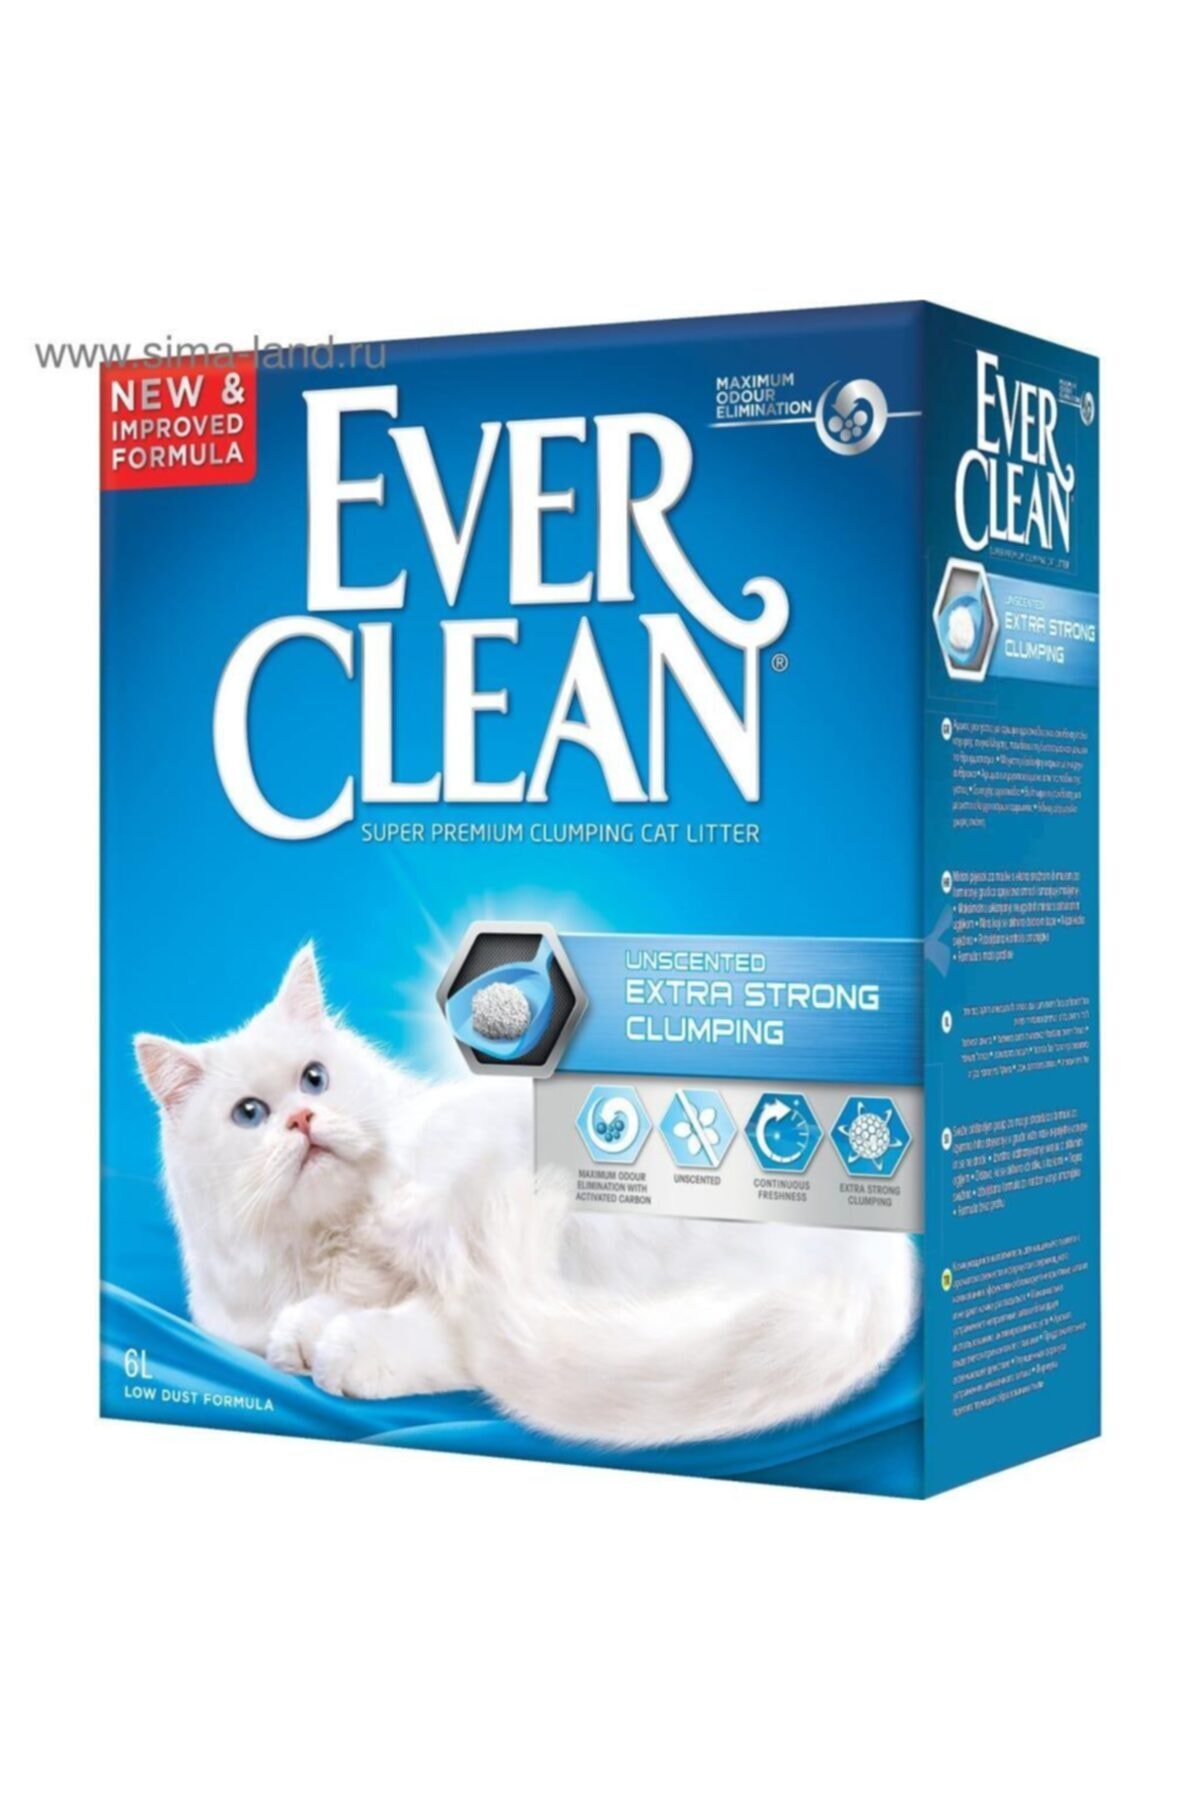 Ever Clean Unscented Extra Strong Clumbing 10 L